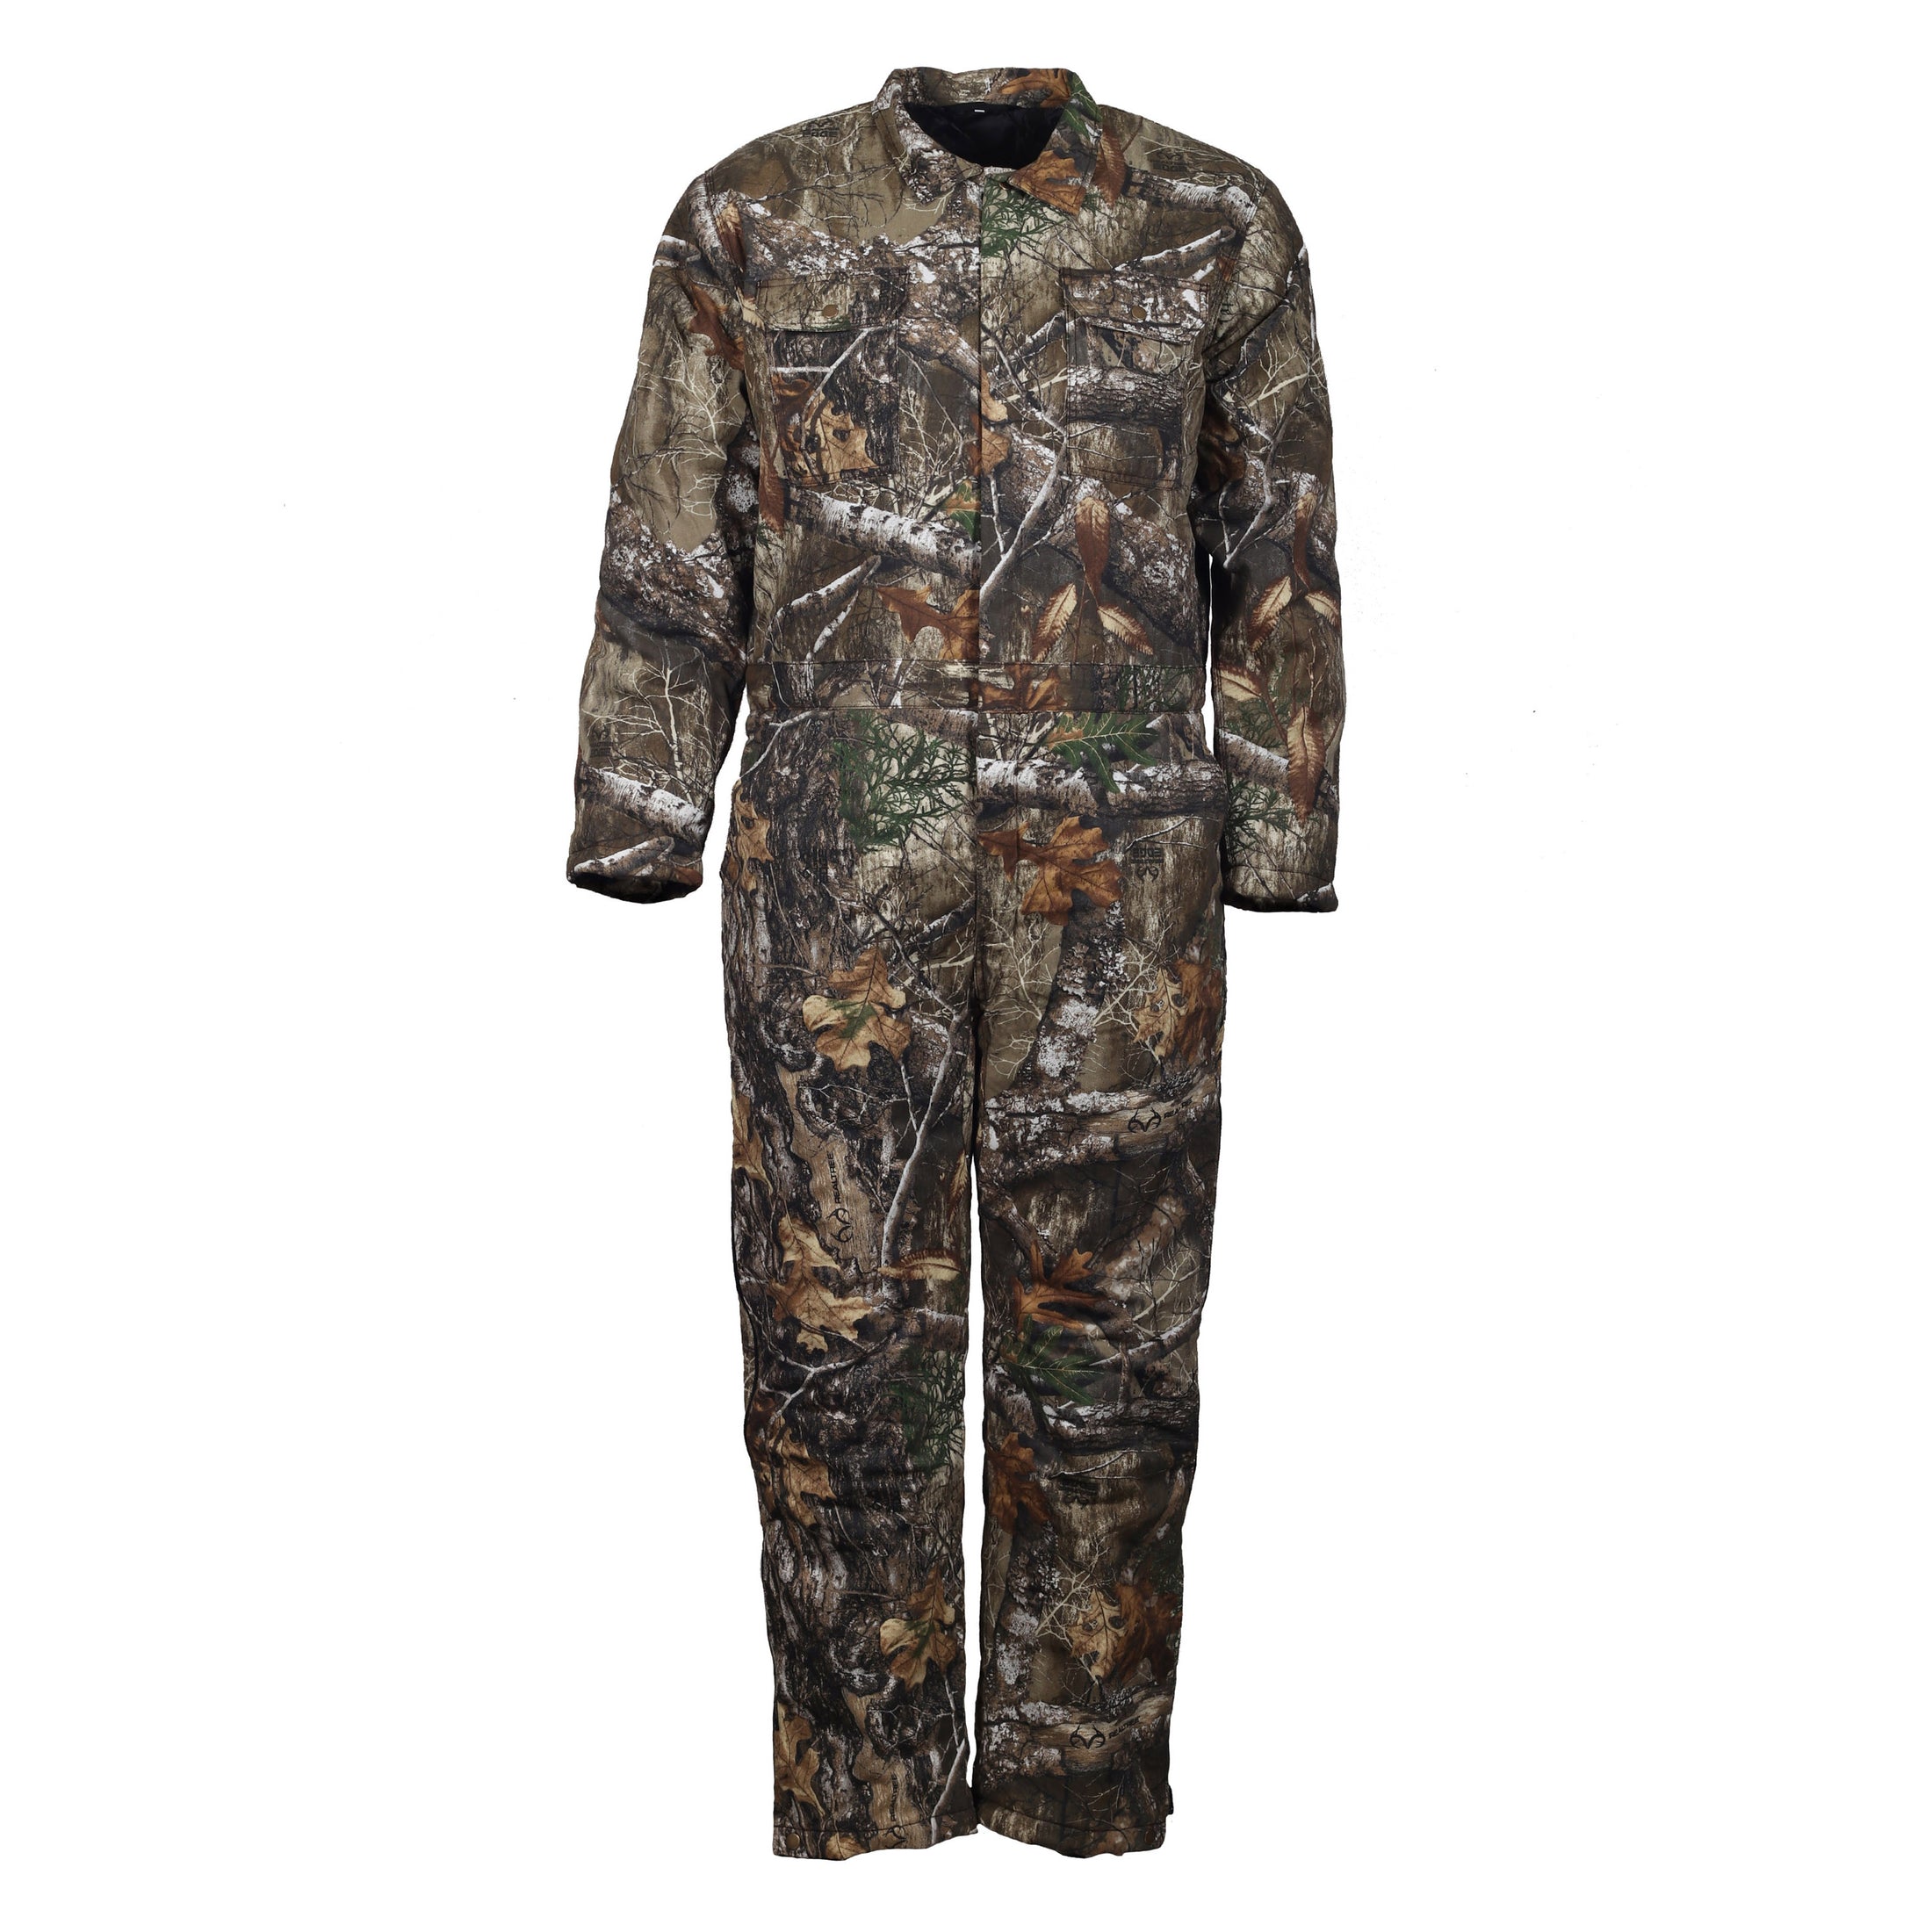 gamehide Insulated Tundra Coverall front (realtree edge)